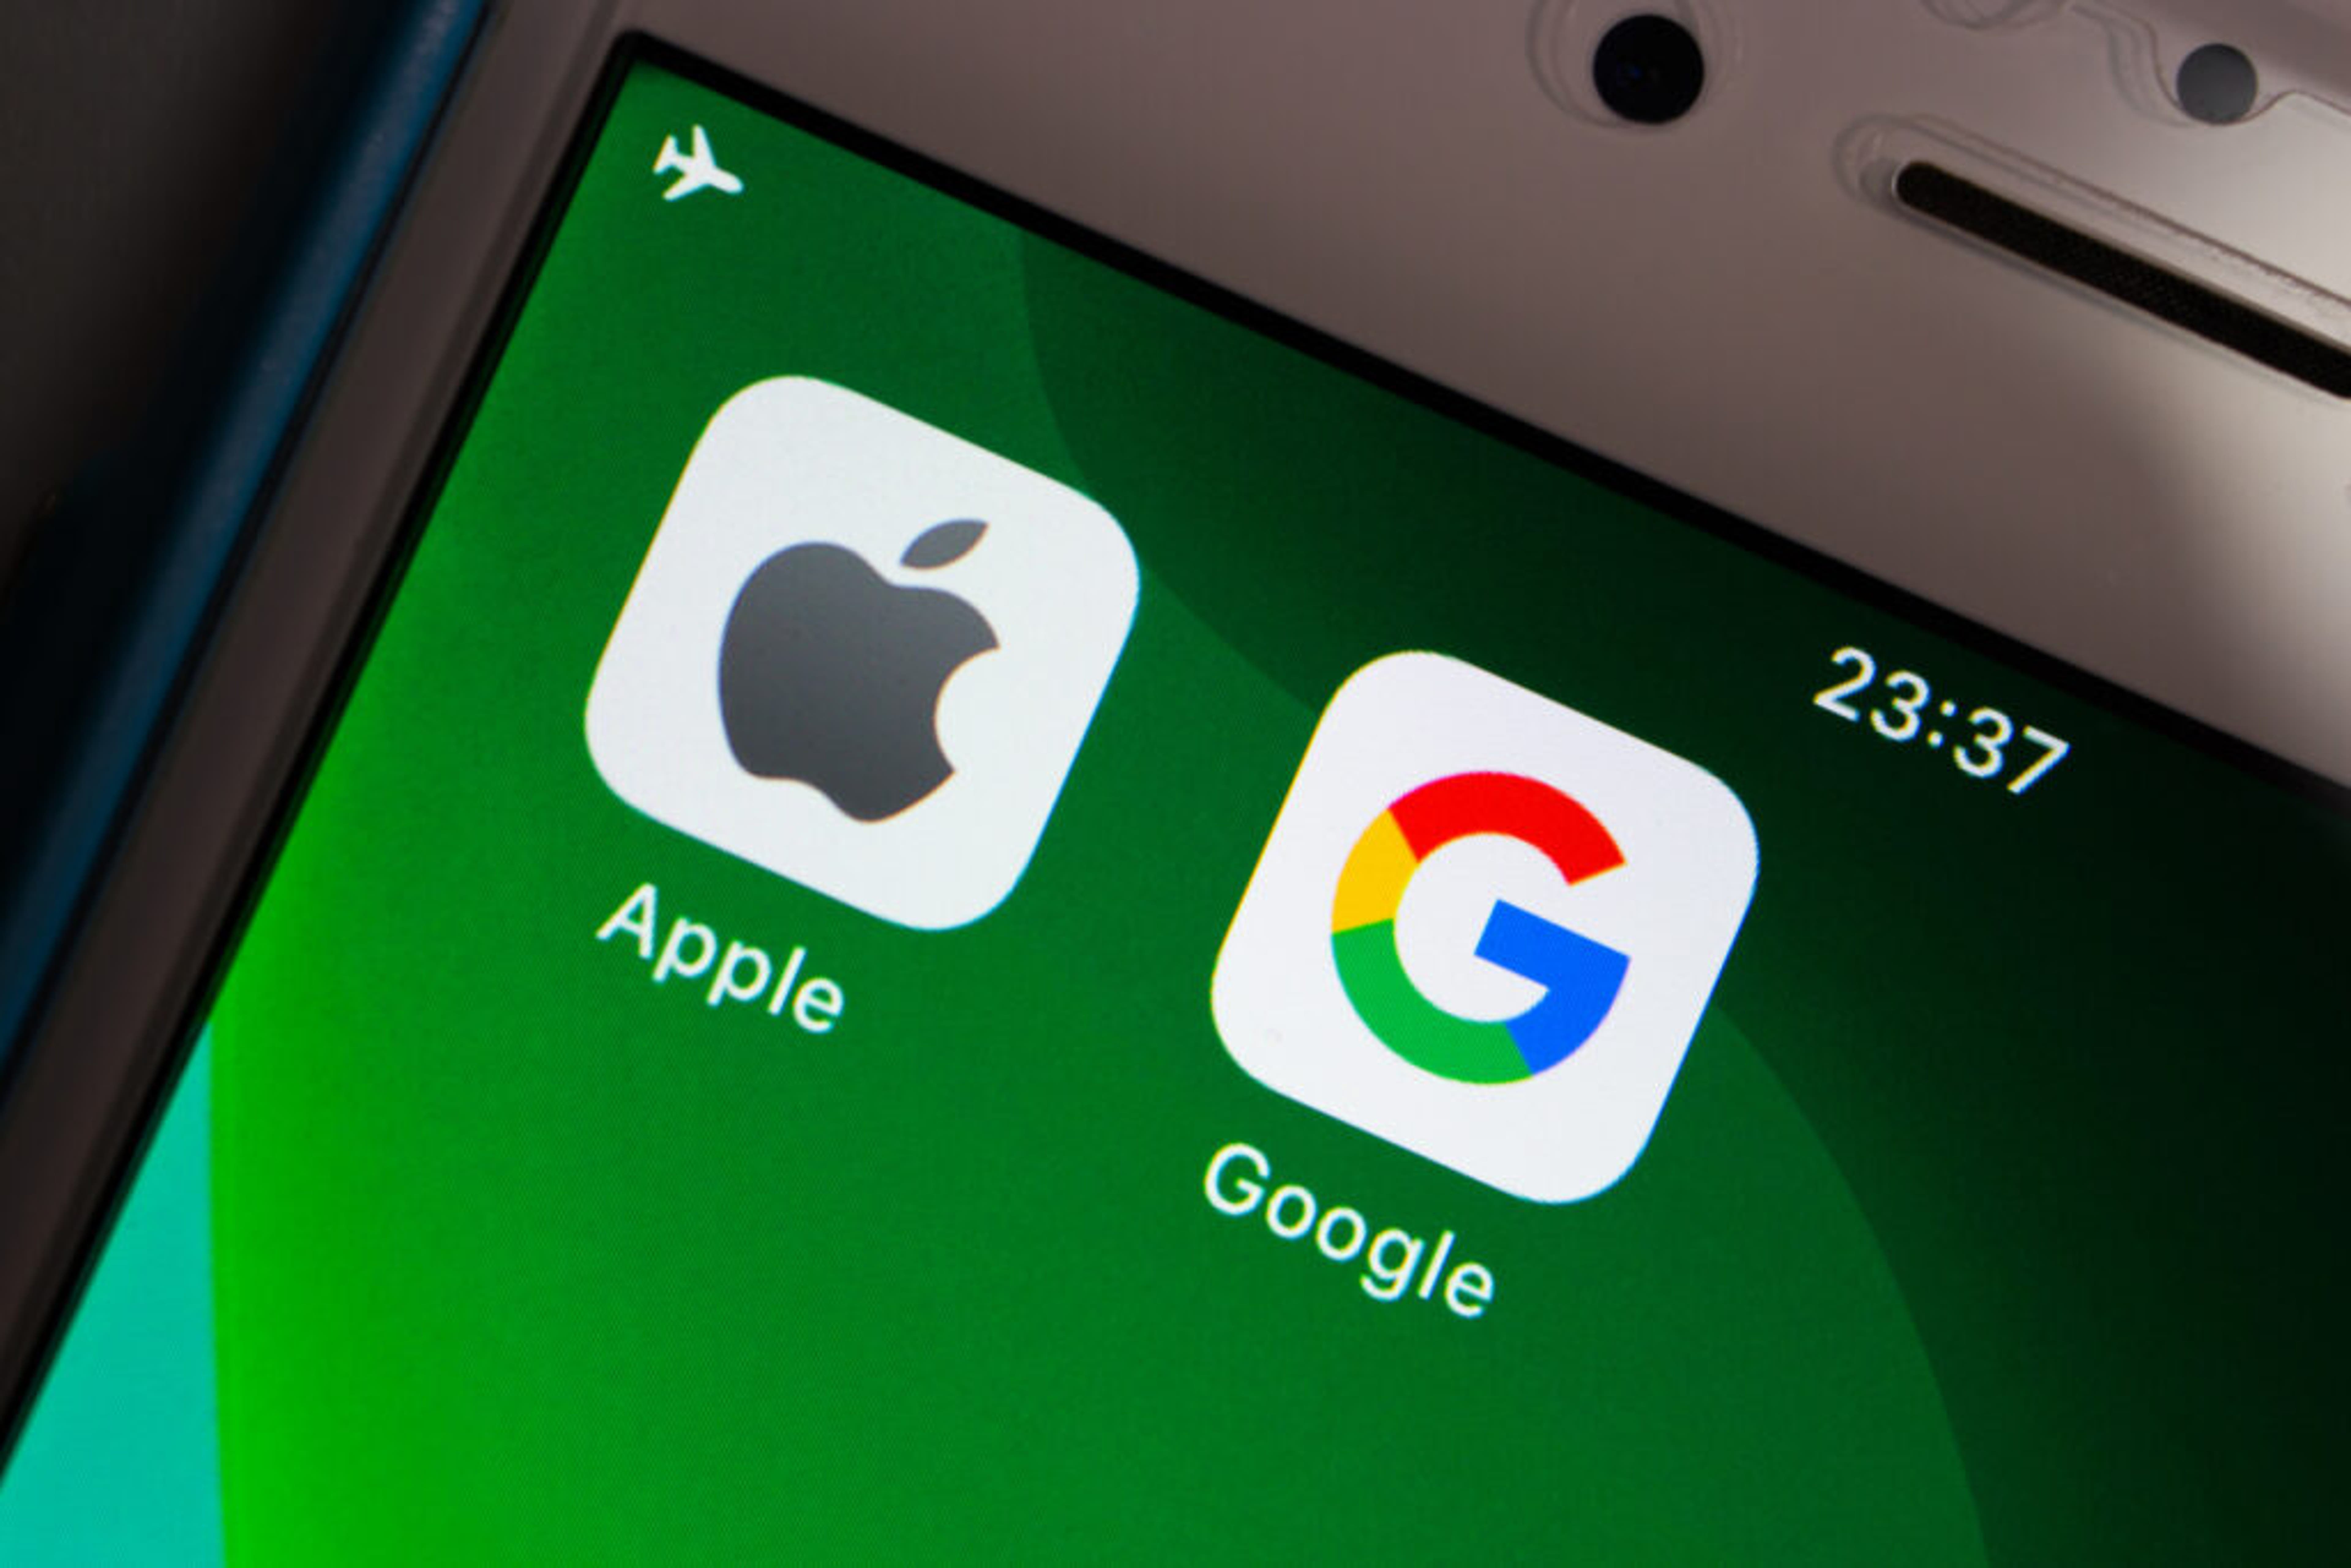 Apple Defends Its $19B Google Search Deal Even As It Laments Its Privacy Policies